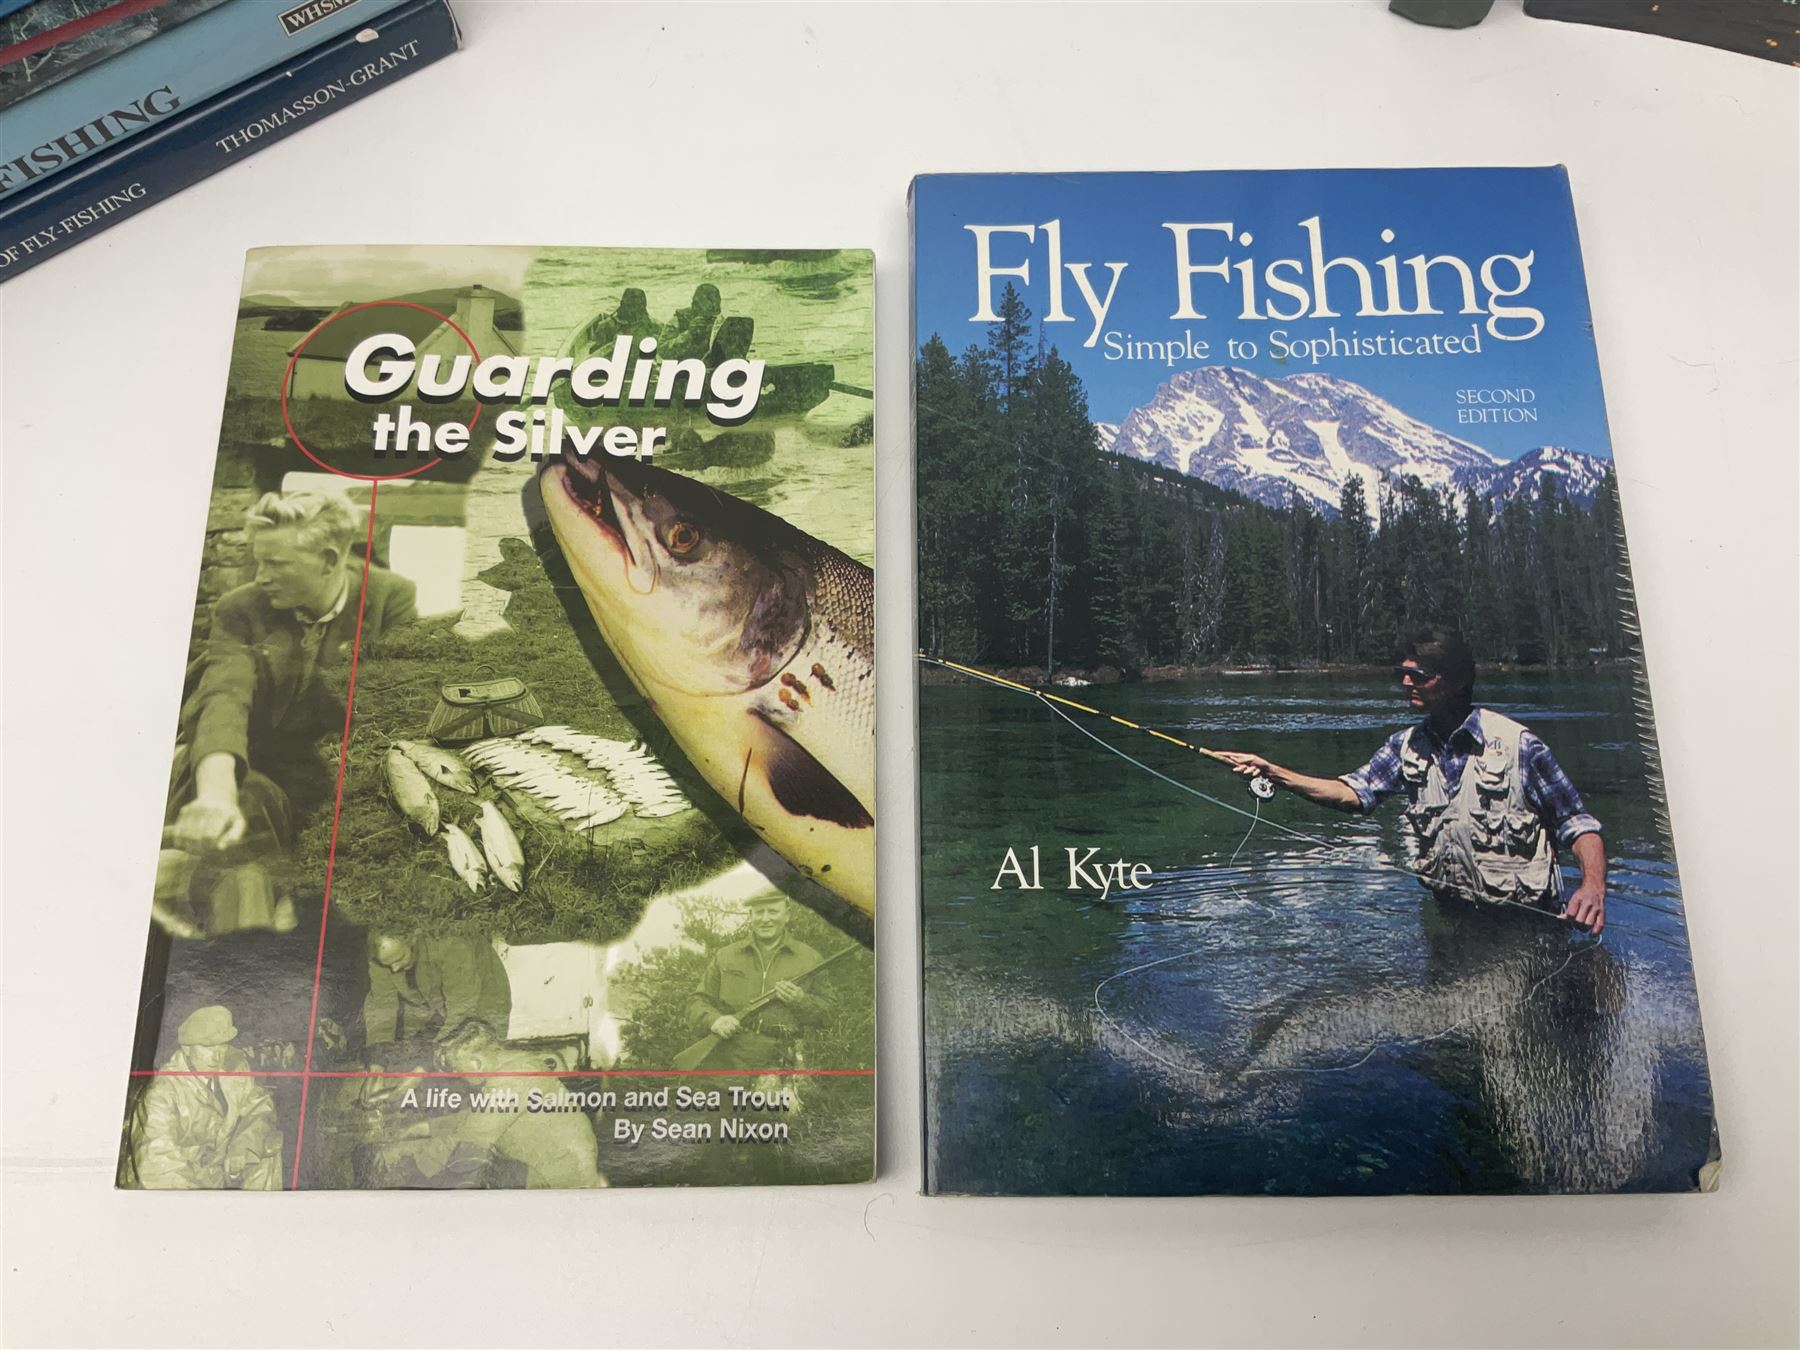 Collection of eighteen books on fly fishing including Child of